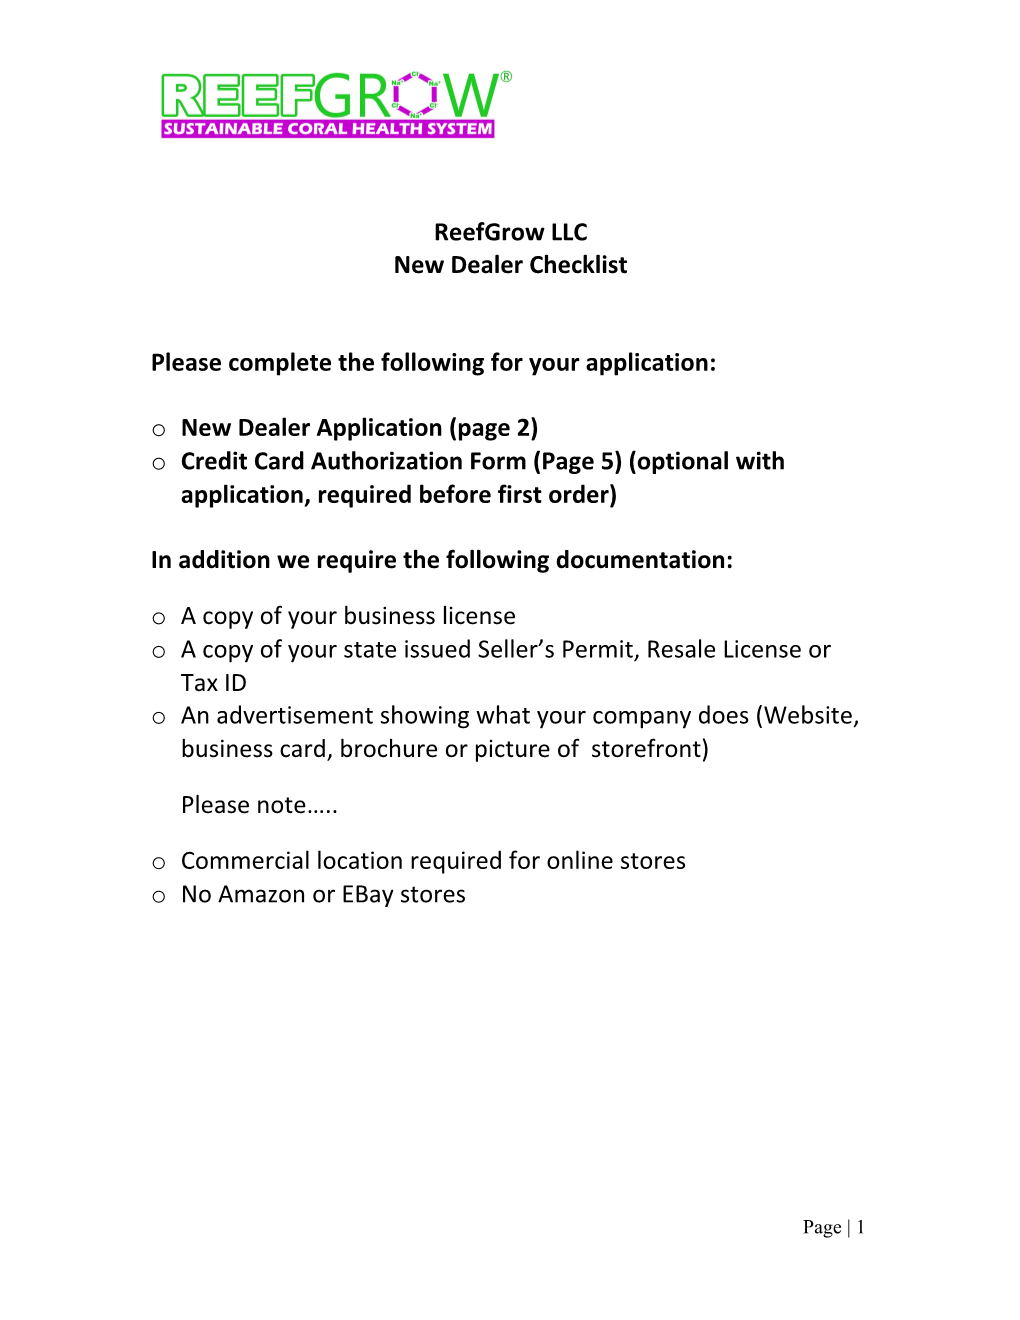 Please Complete the Following for Your Application